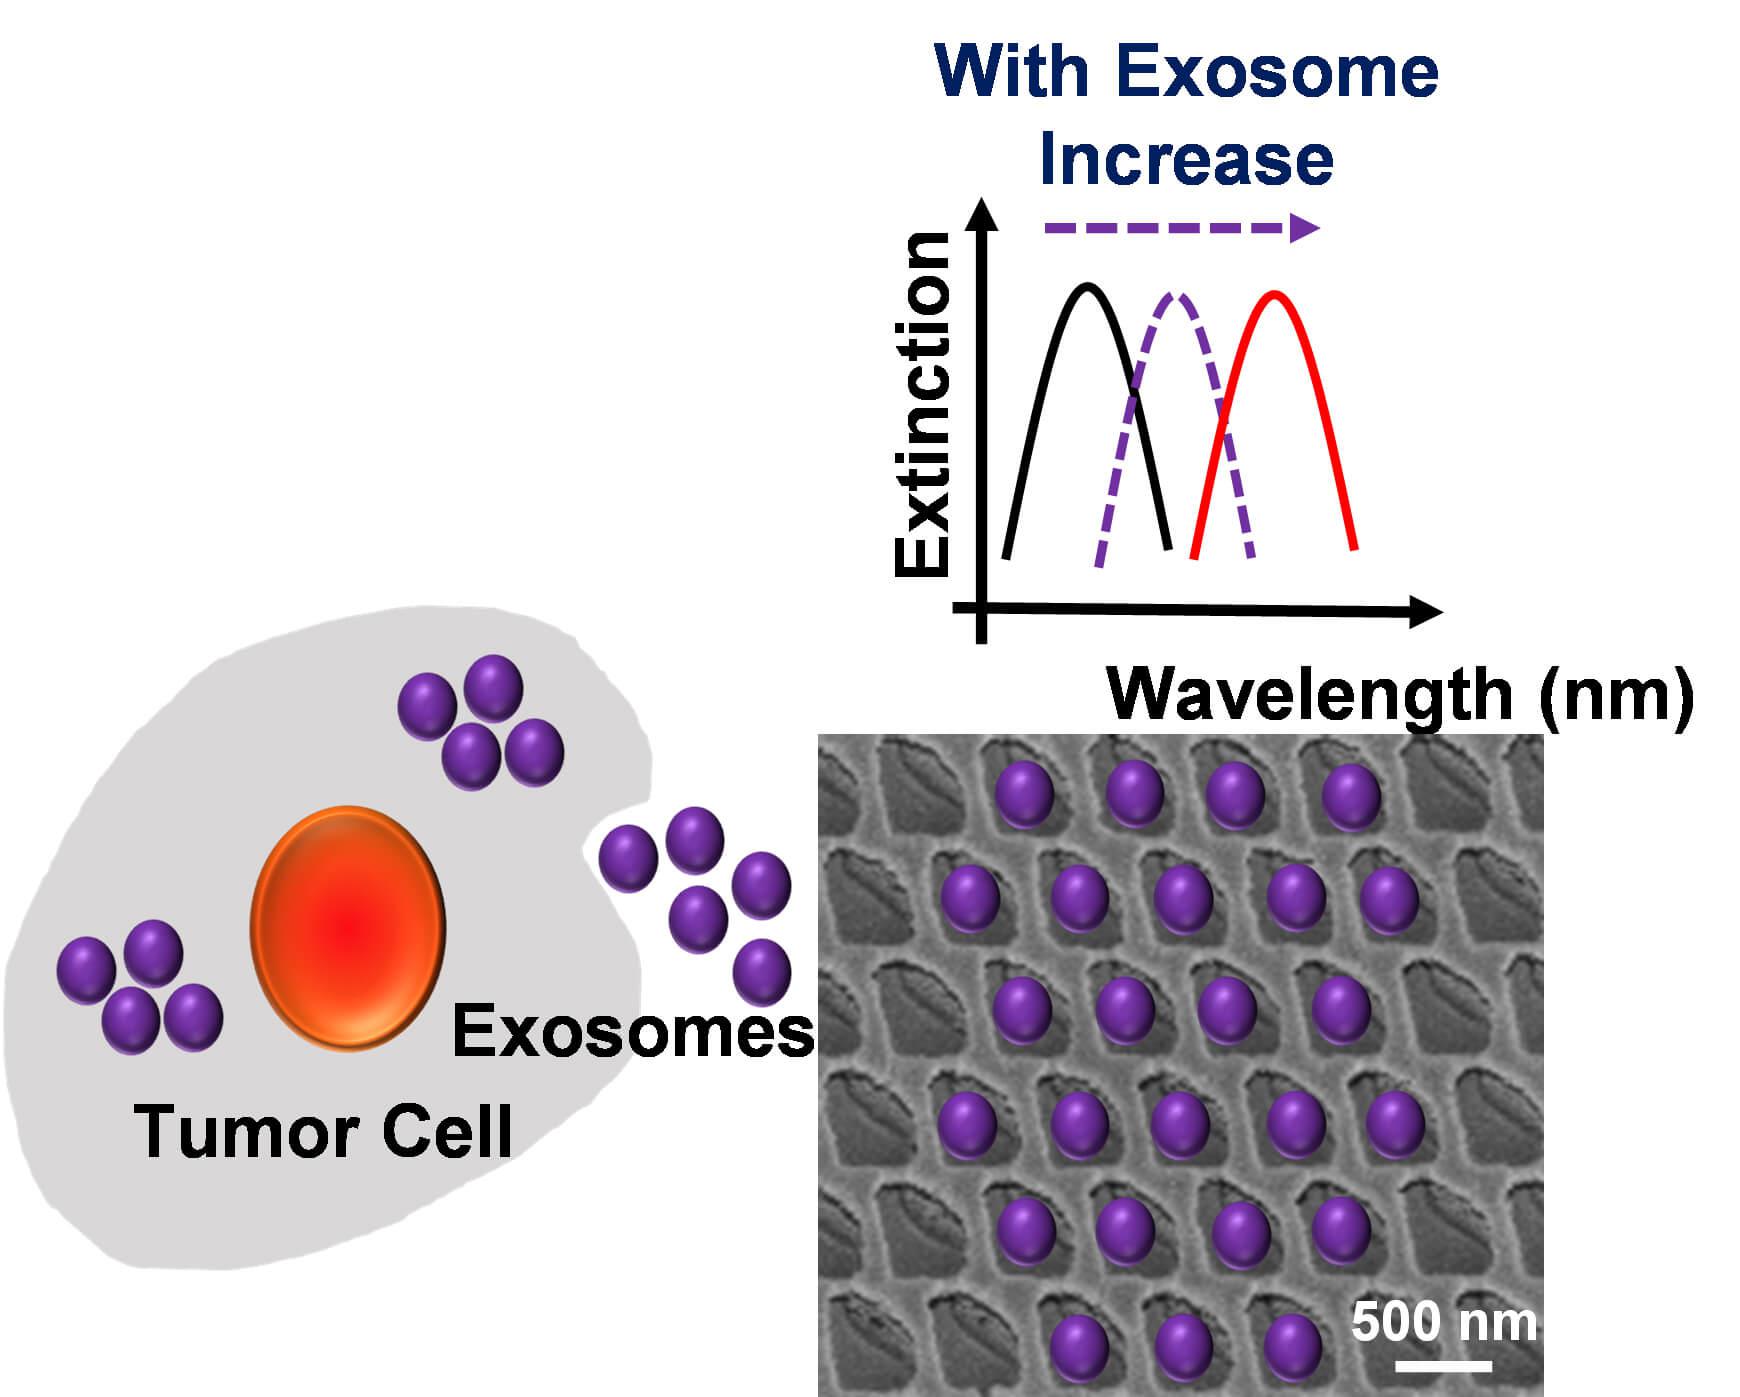 A Microfluidic Biosensing System for Improved Cancer Diagnostics and Screening 0